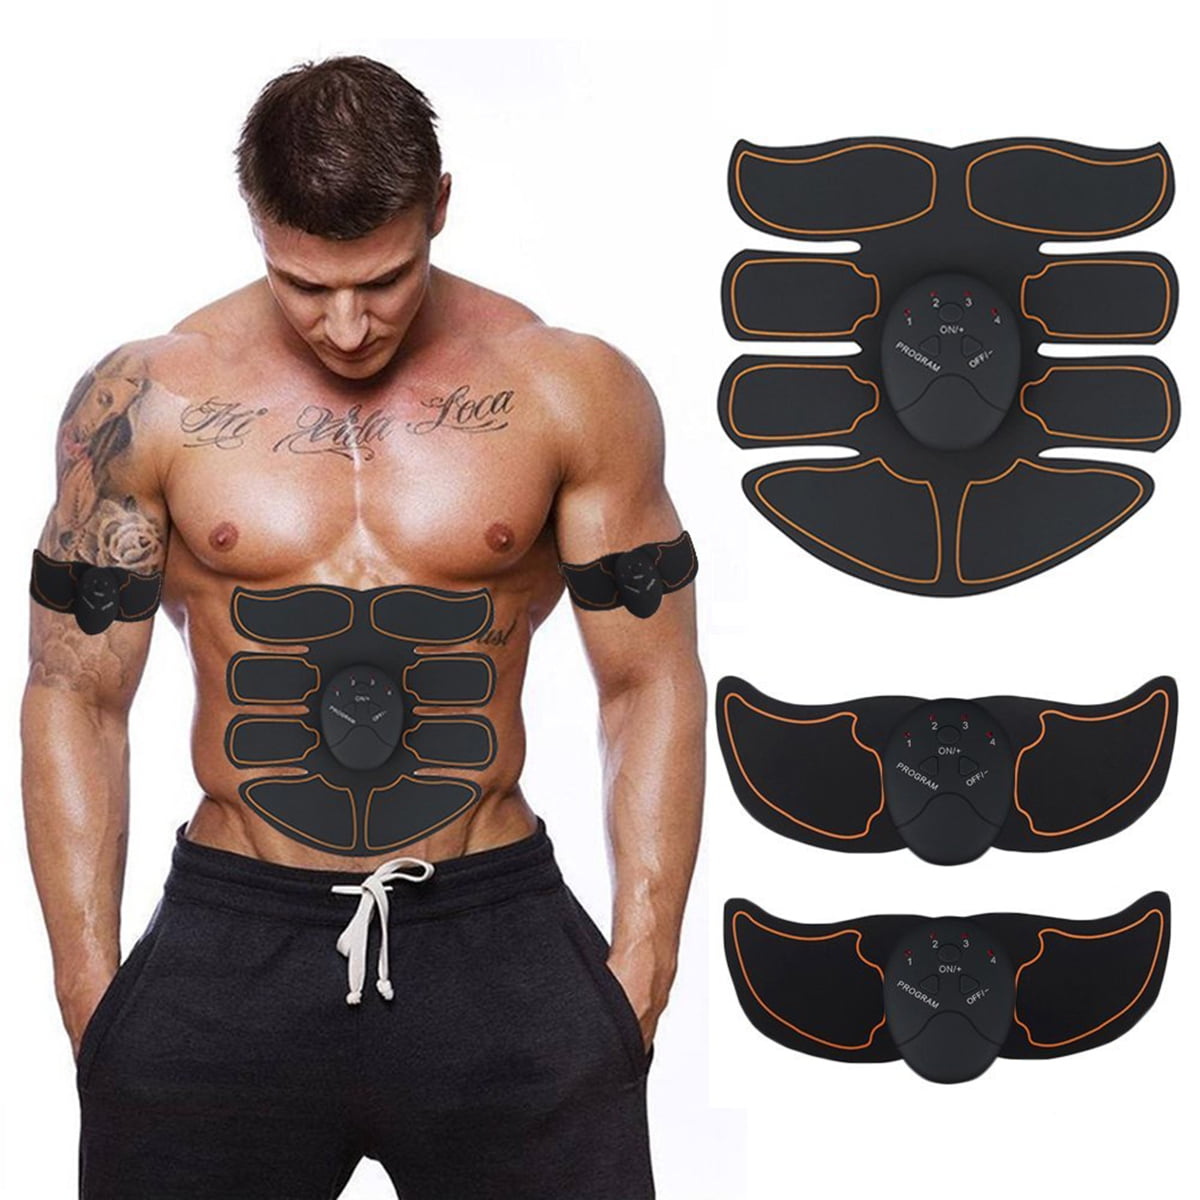 Details about   EMS Abdominal Fitness Muscle Gym Training Gear Exercise Body Building Belt Set 